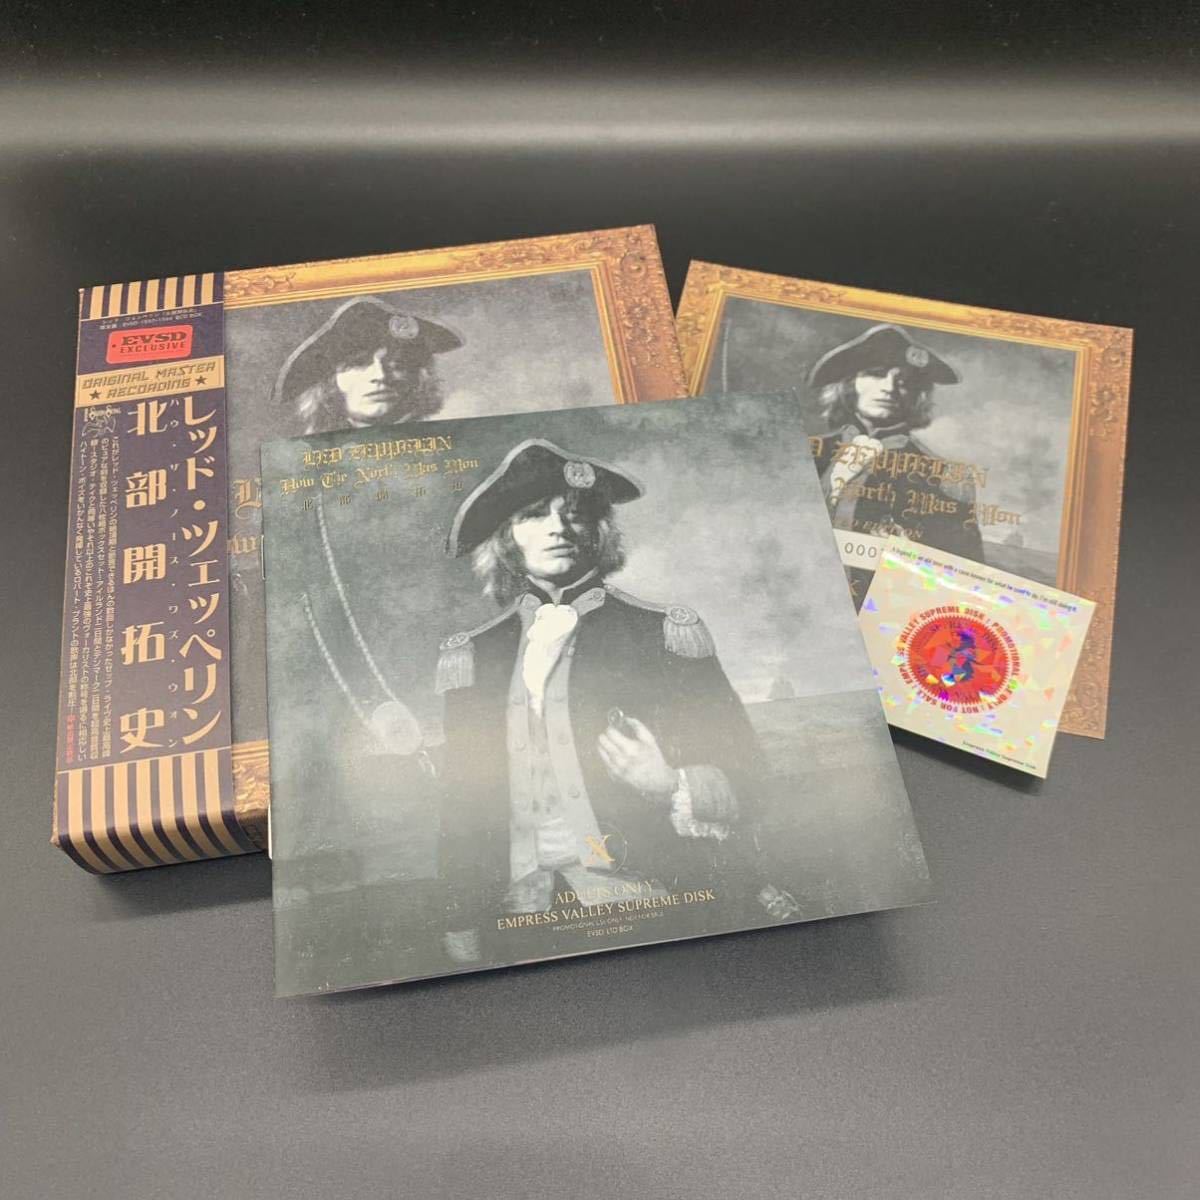 LED ZEPPELIN : HOW THE NORTH WAS WON「北部開拓史」9CD BOX with Booklet EMPRESS VALLEY SUPREME DISK 100 Set Numbered! 完売品！の画像7